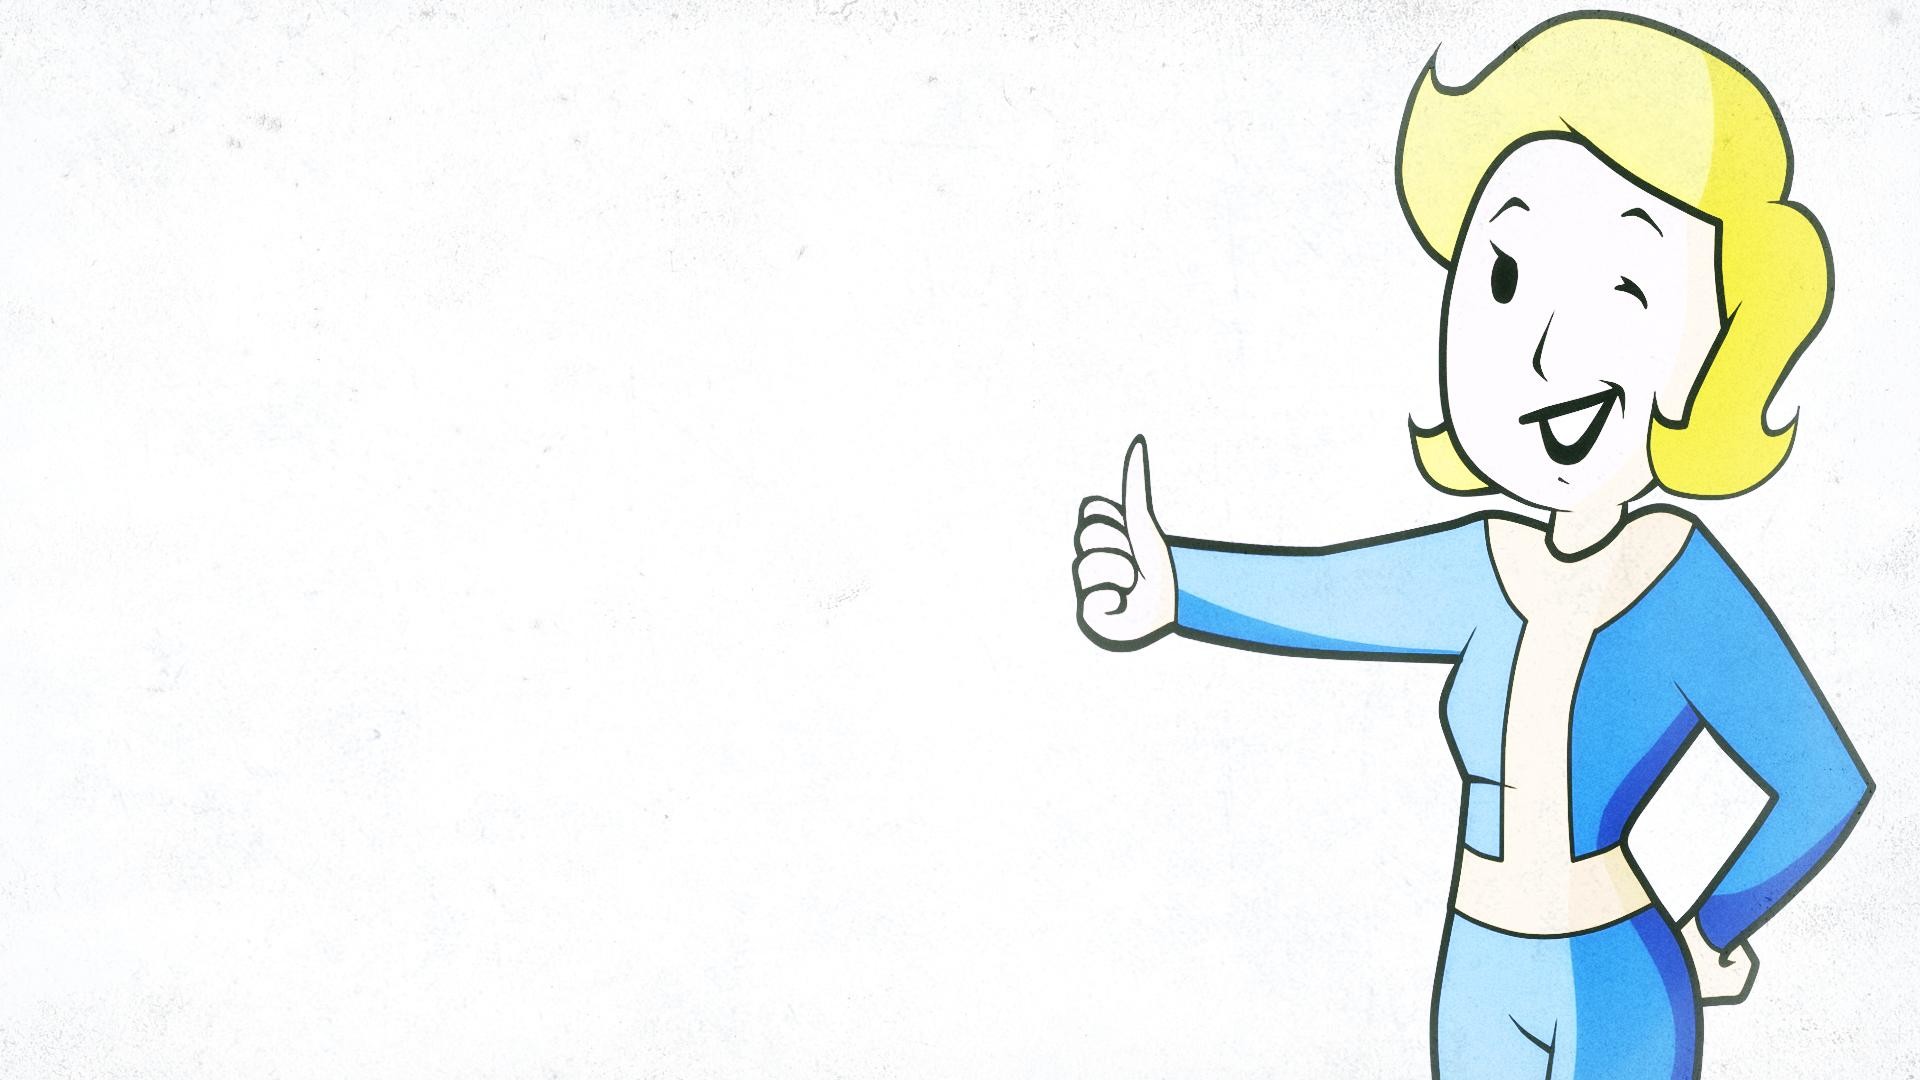 Vault Girl thanks you for all the support